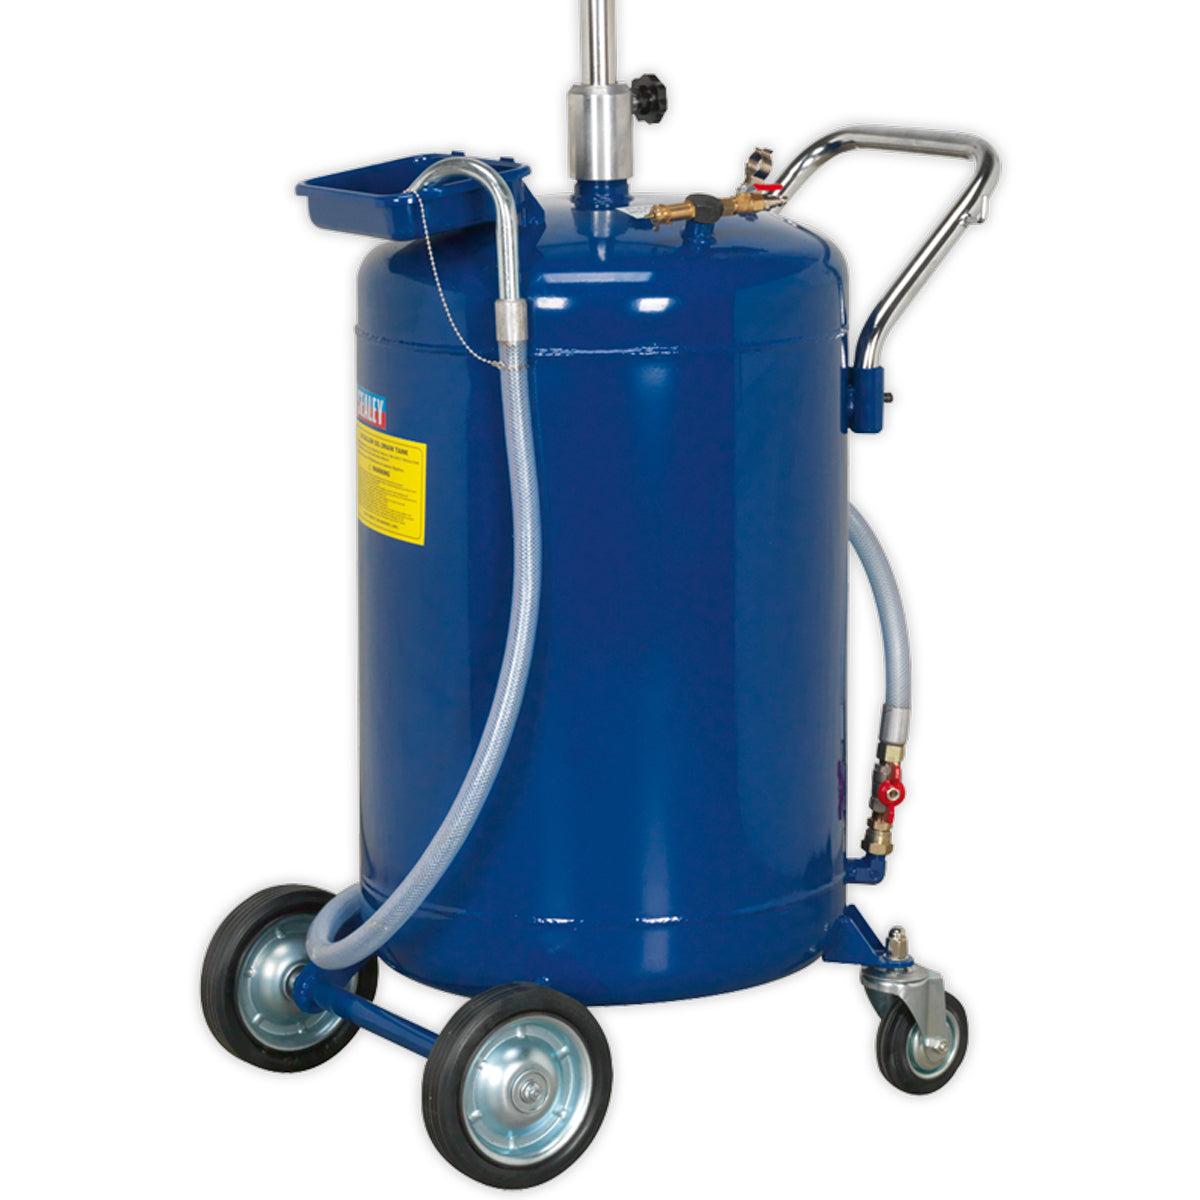 Sealey AK458DX 110L Air Discharge Mobile Oil Drainer